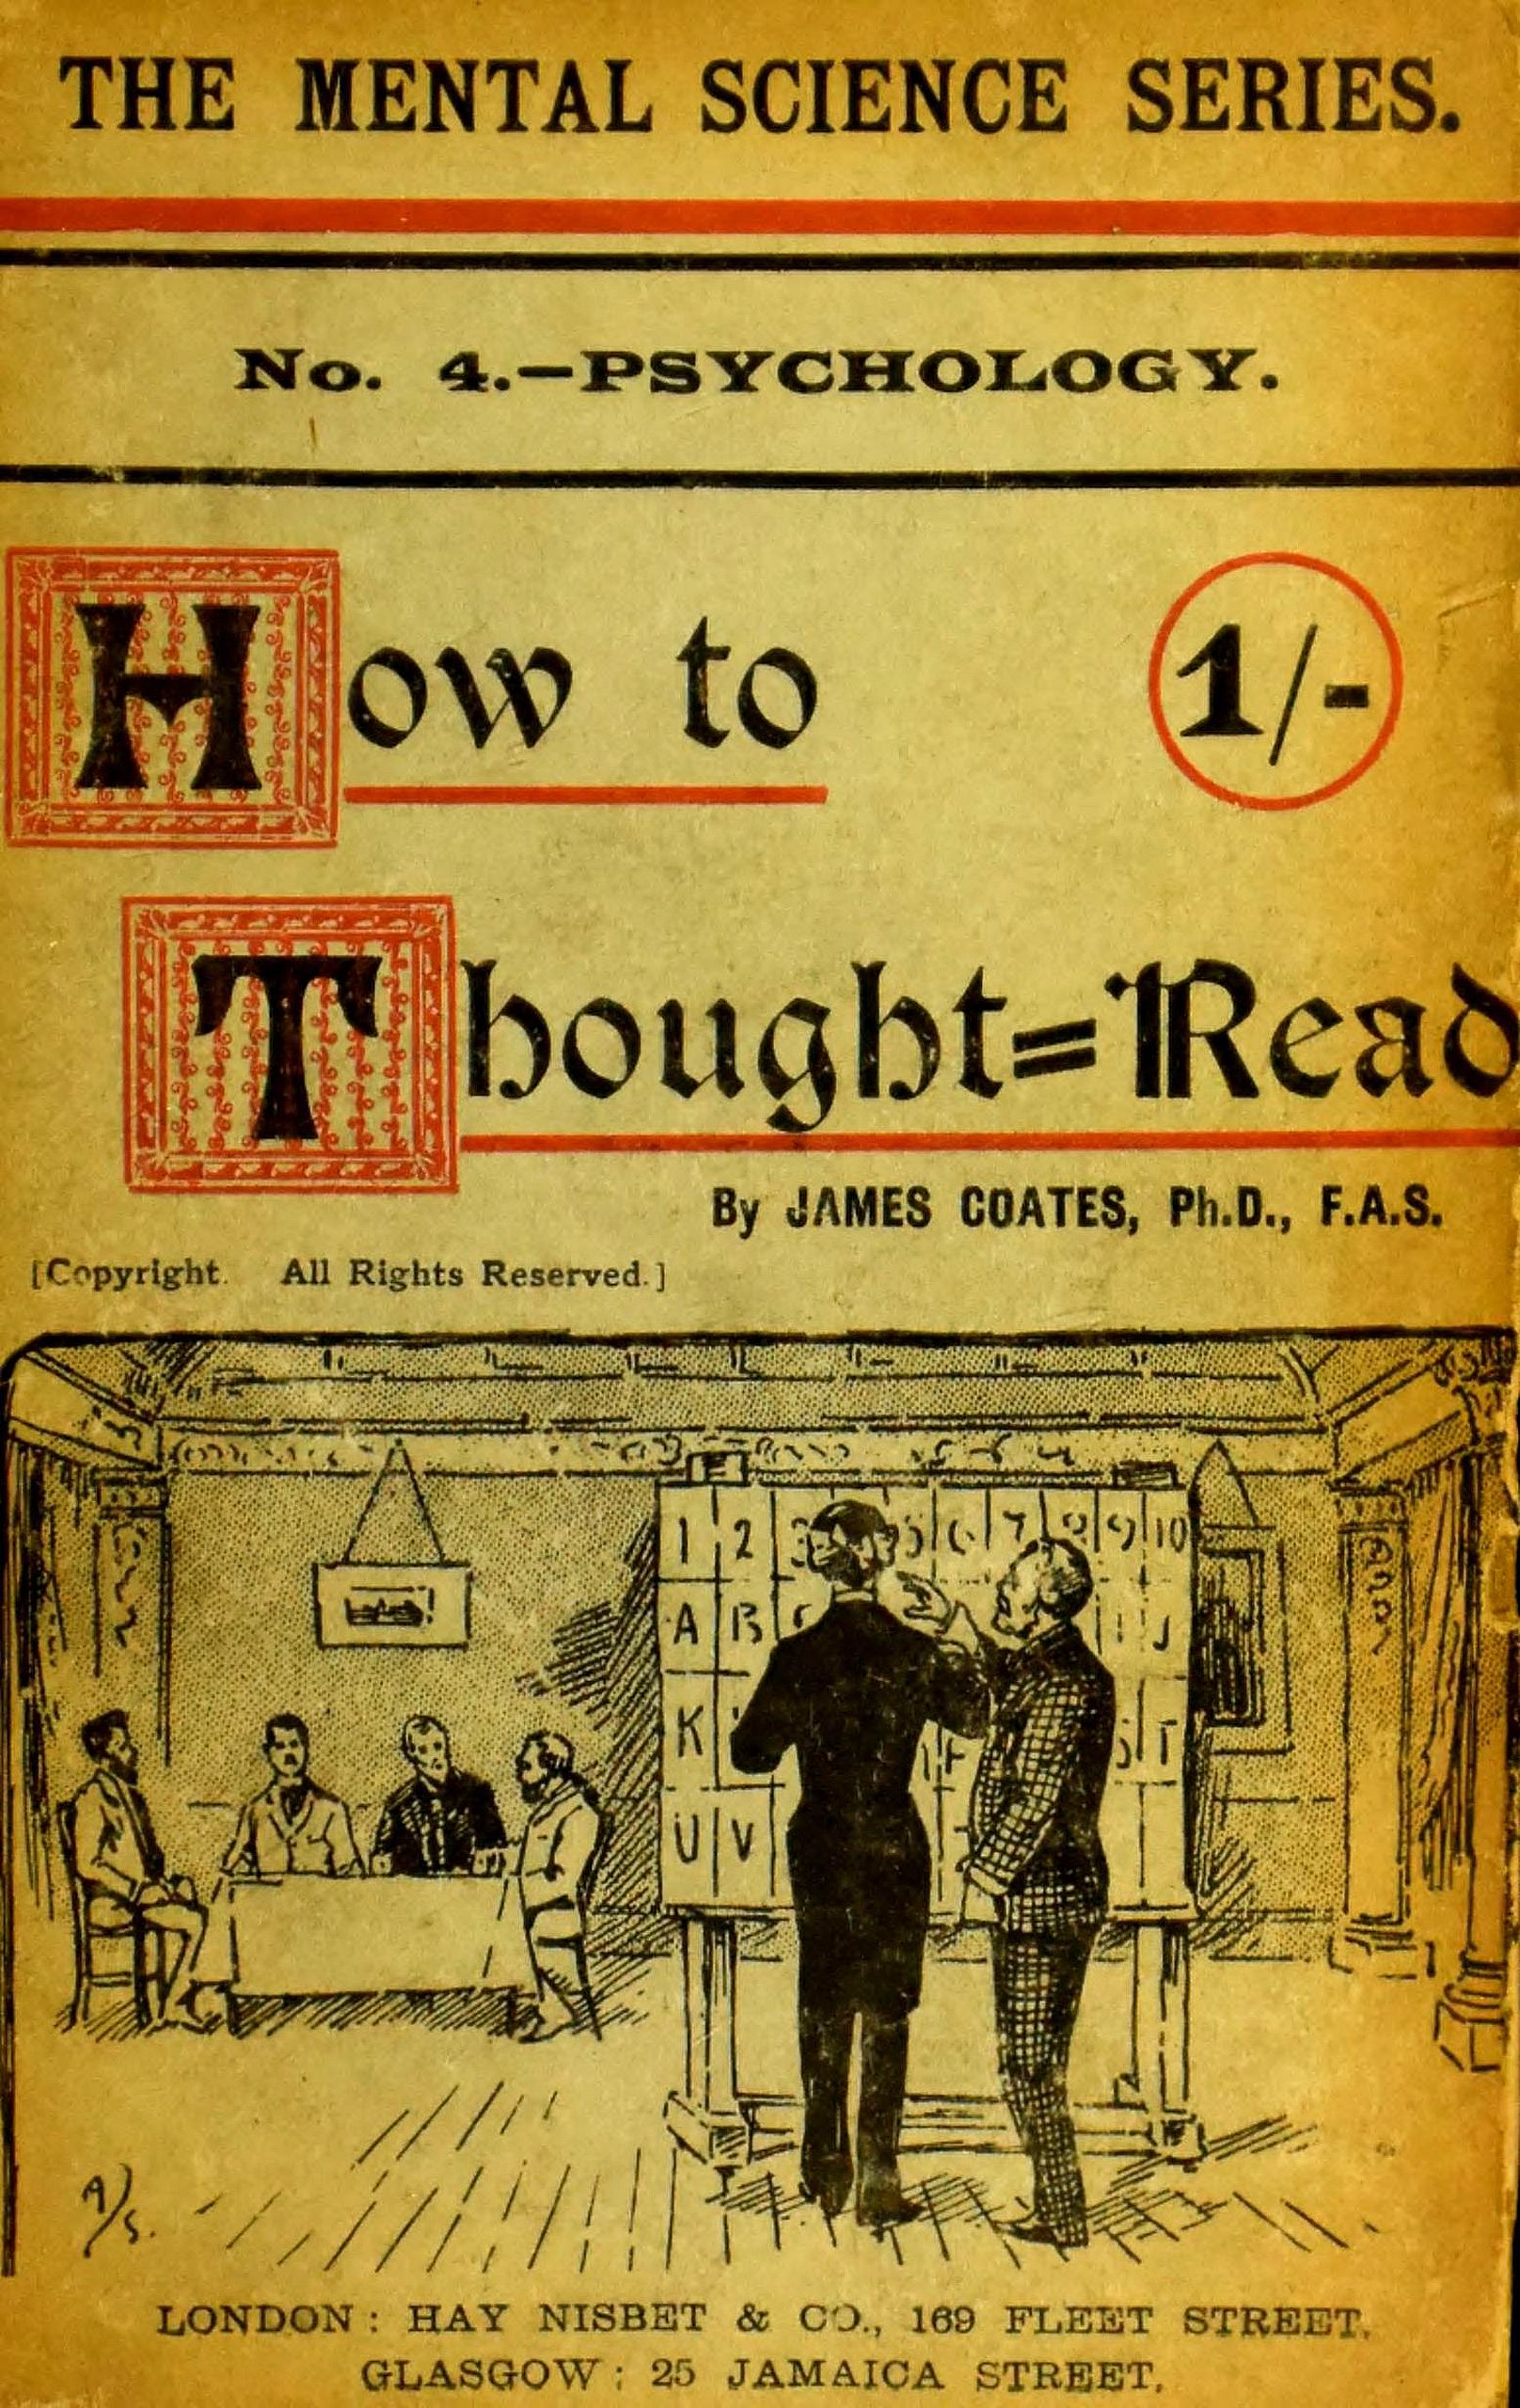 How to thought-read&#10;A manual of instruction in the strange and mystic in daily life, psychic phenomena, including hypnotic, mesmeric, and psychic states, mind and muscle reading, thought transference, psychometry, clairvoyance, and phenomenal spiritualism